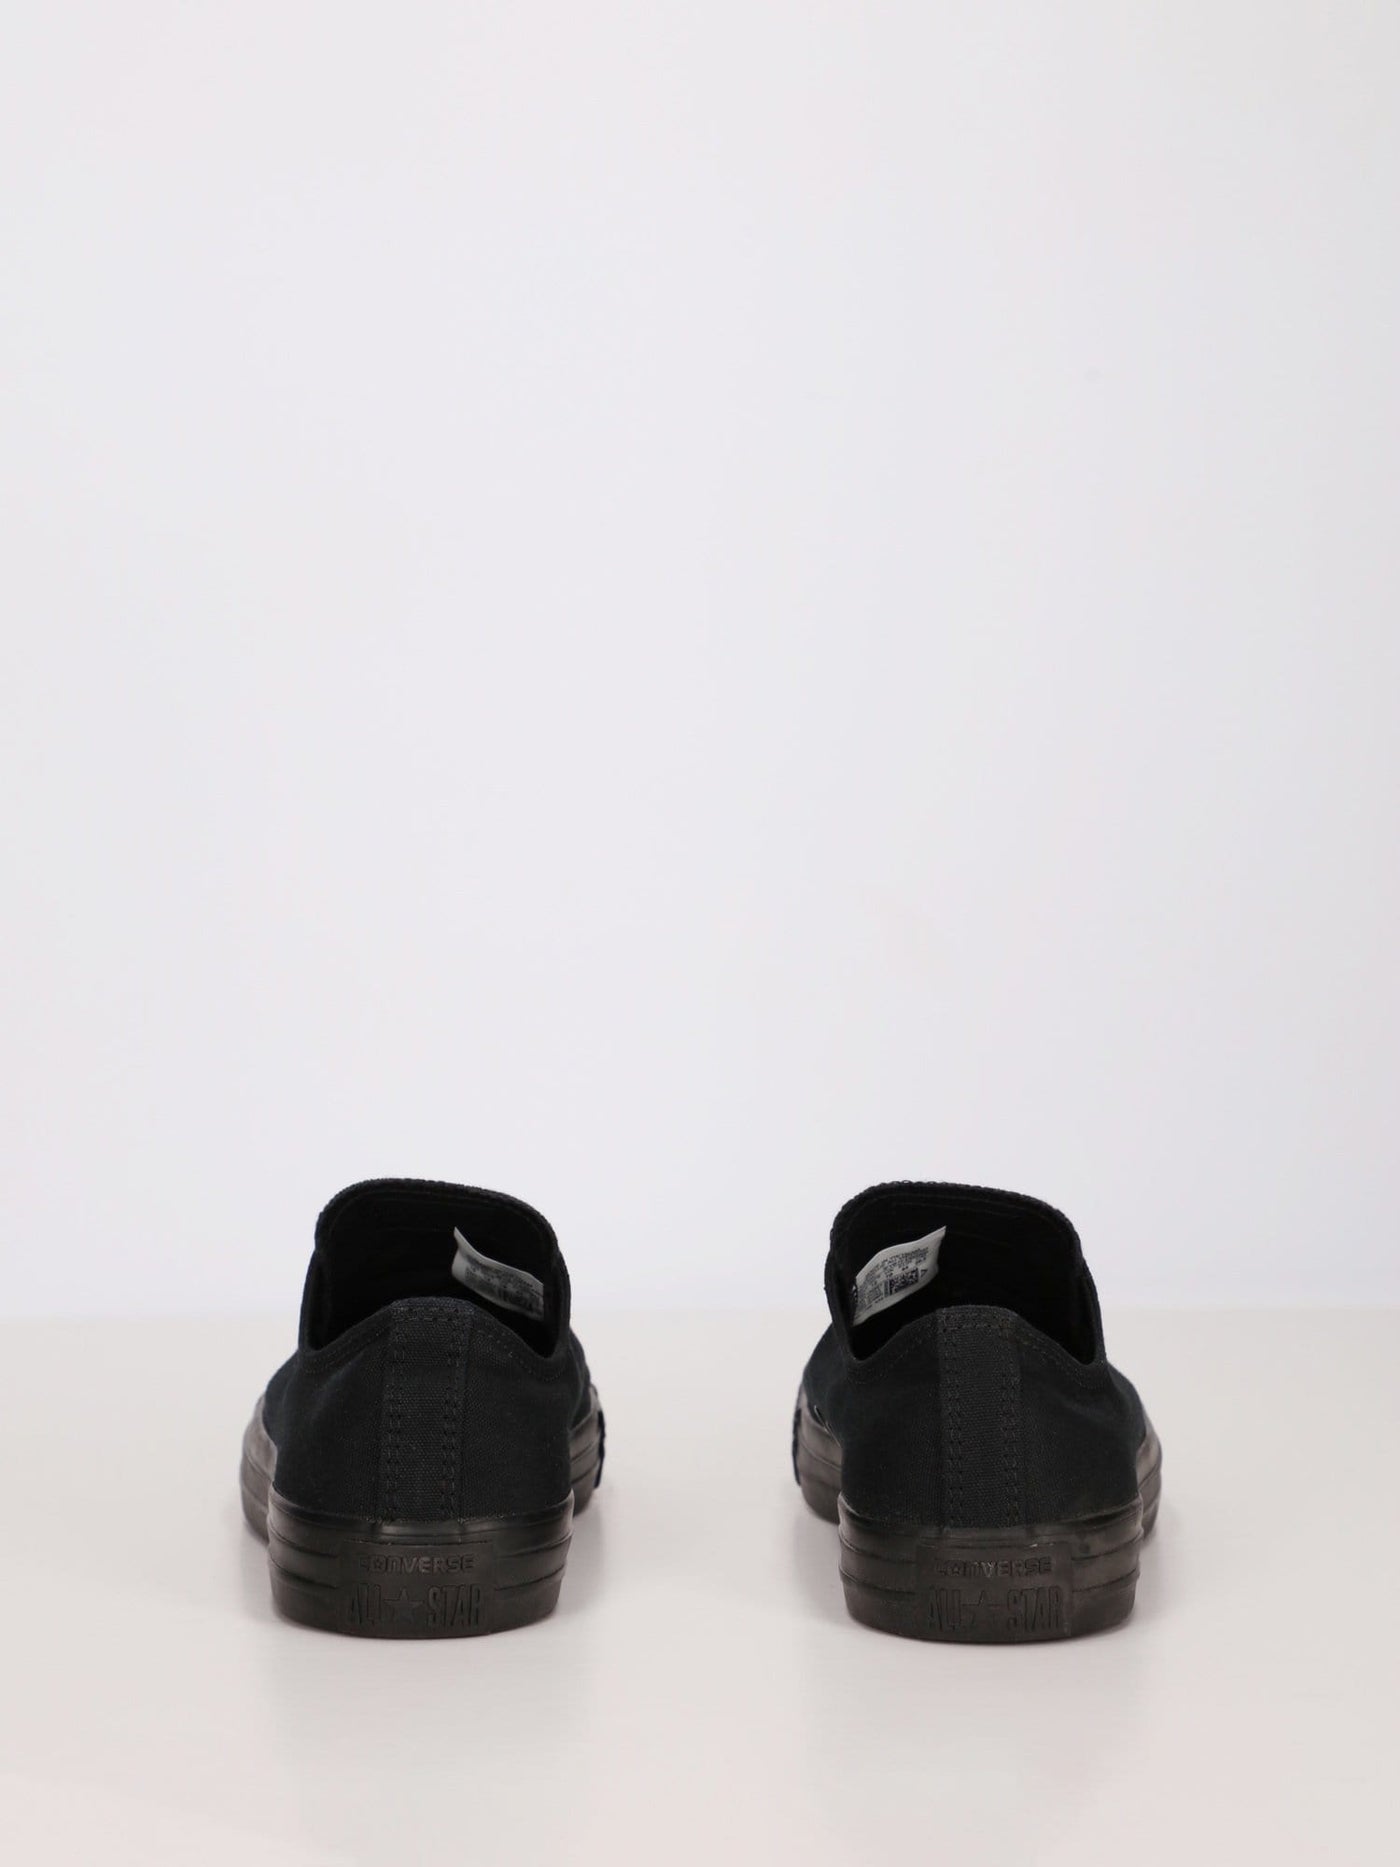 Converse Sneakers Black Monochrome / 39 Chuck Taylor All Star Ox 'All Black' Unisex Sneakers